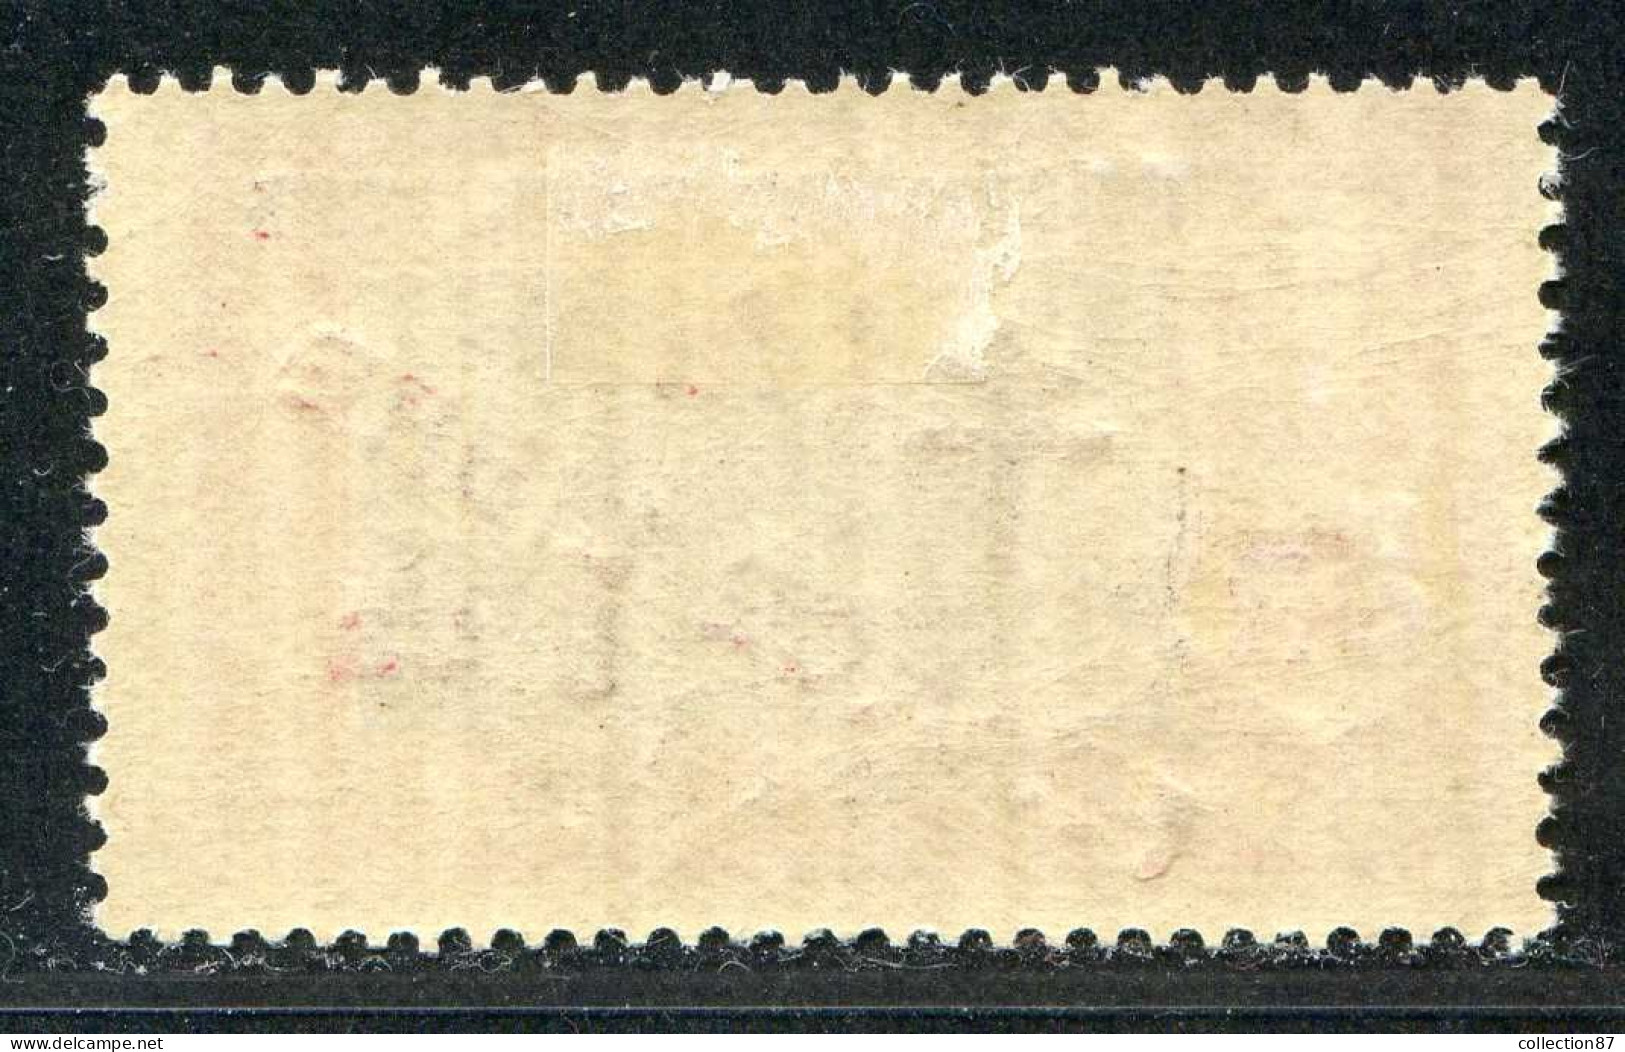 Réf 75 CL2 < -- INDE - FRANCE LIBRE < N° 212 * NEUF Ch.Dos Visible MH * - Ungebraucht